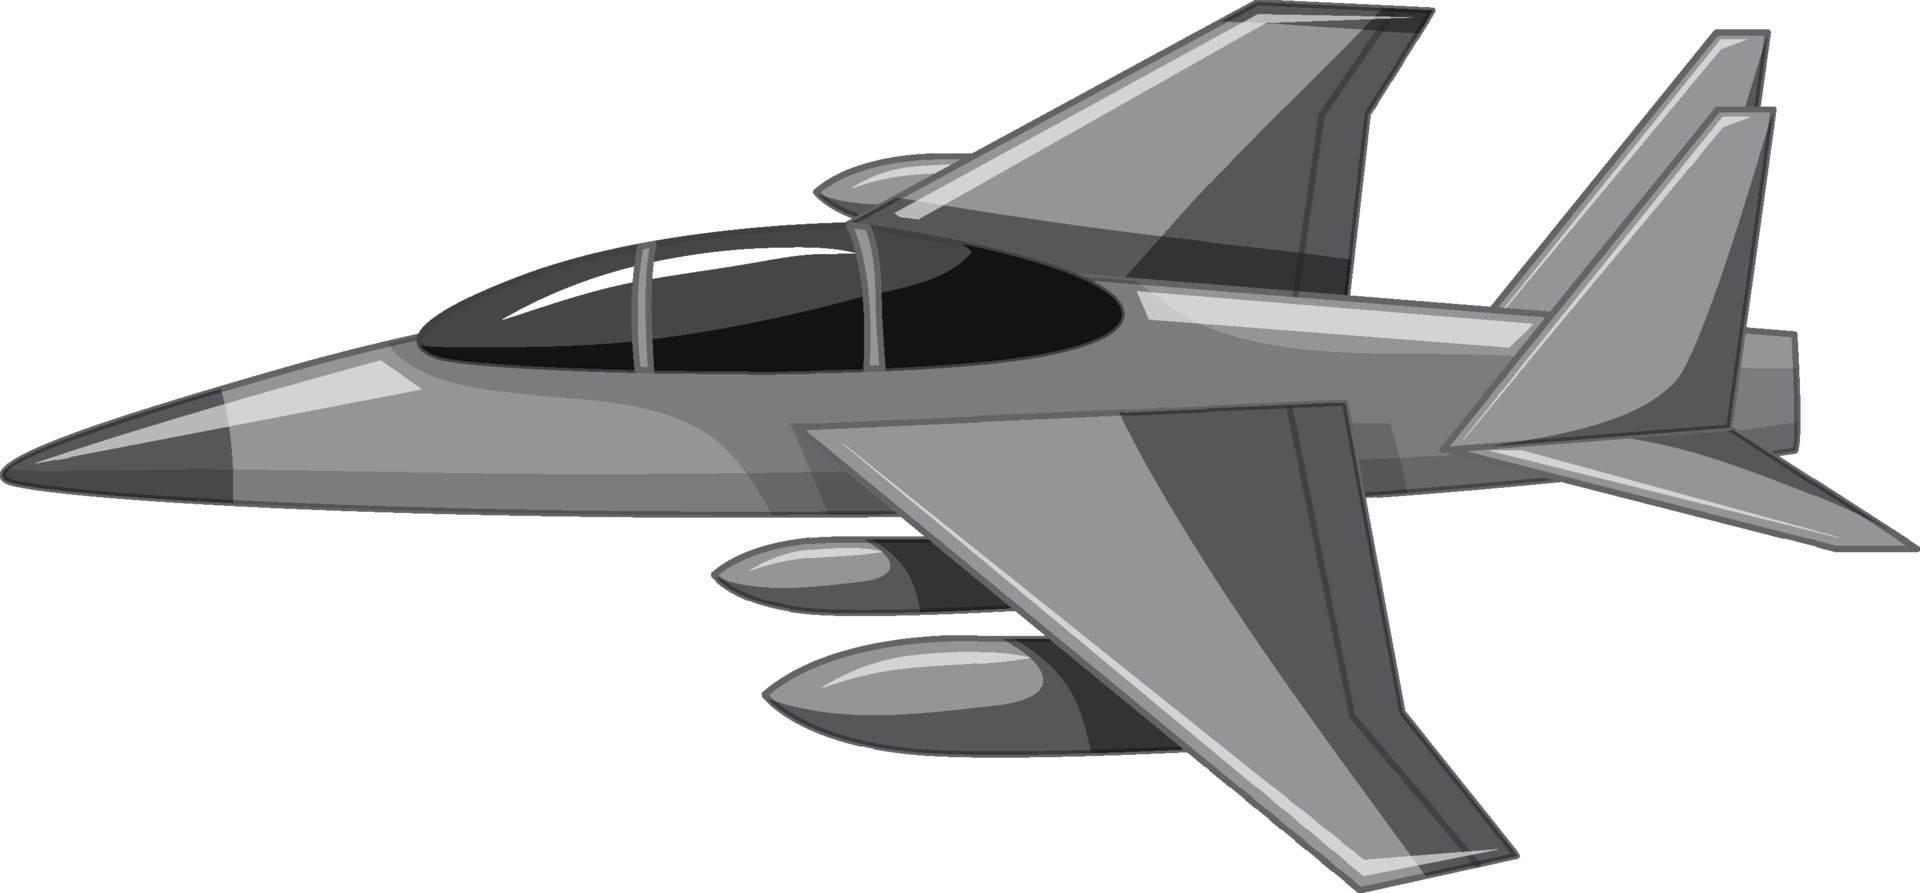 Free Vector A Jet Fighter Or Military Aircraft Isolated On White ...